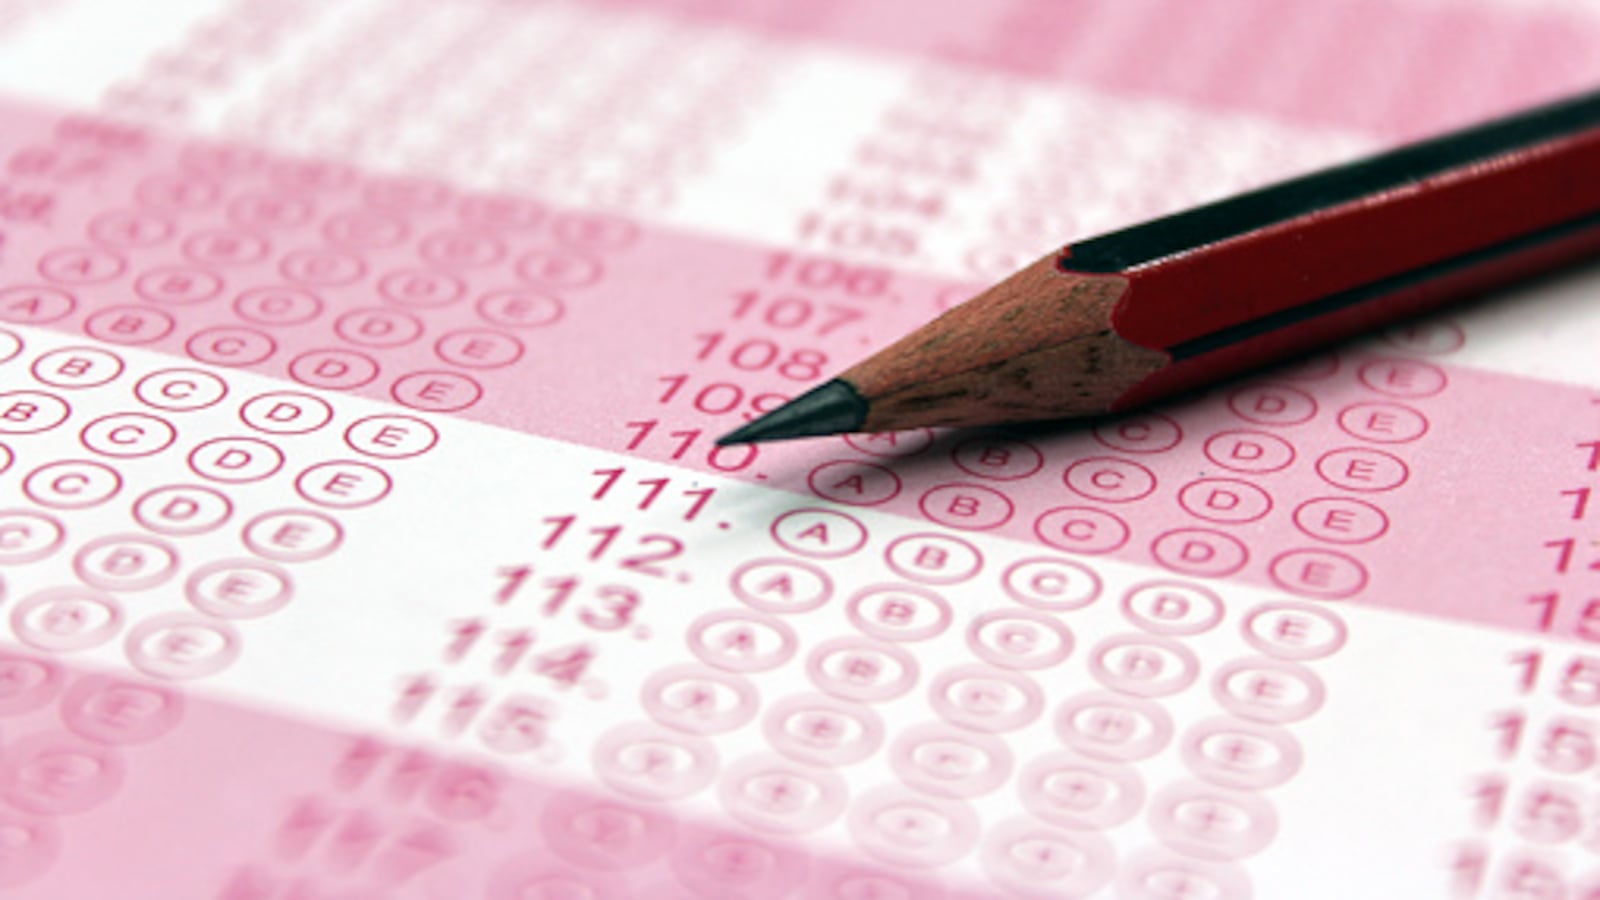 New York will release state test scores later this month.